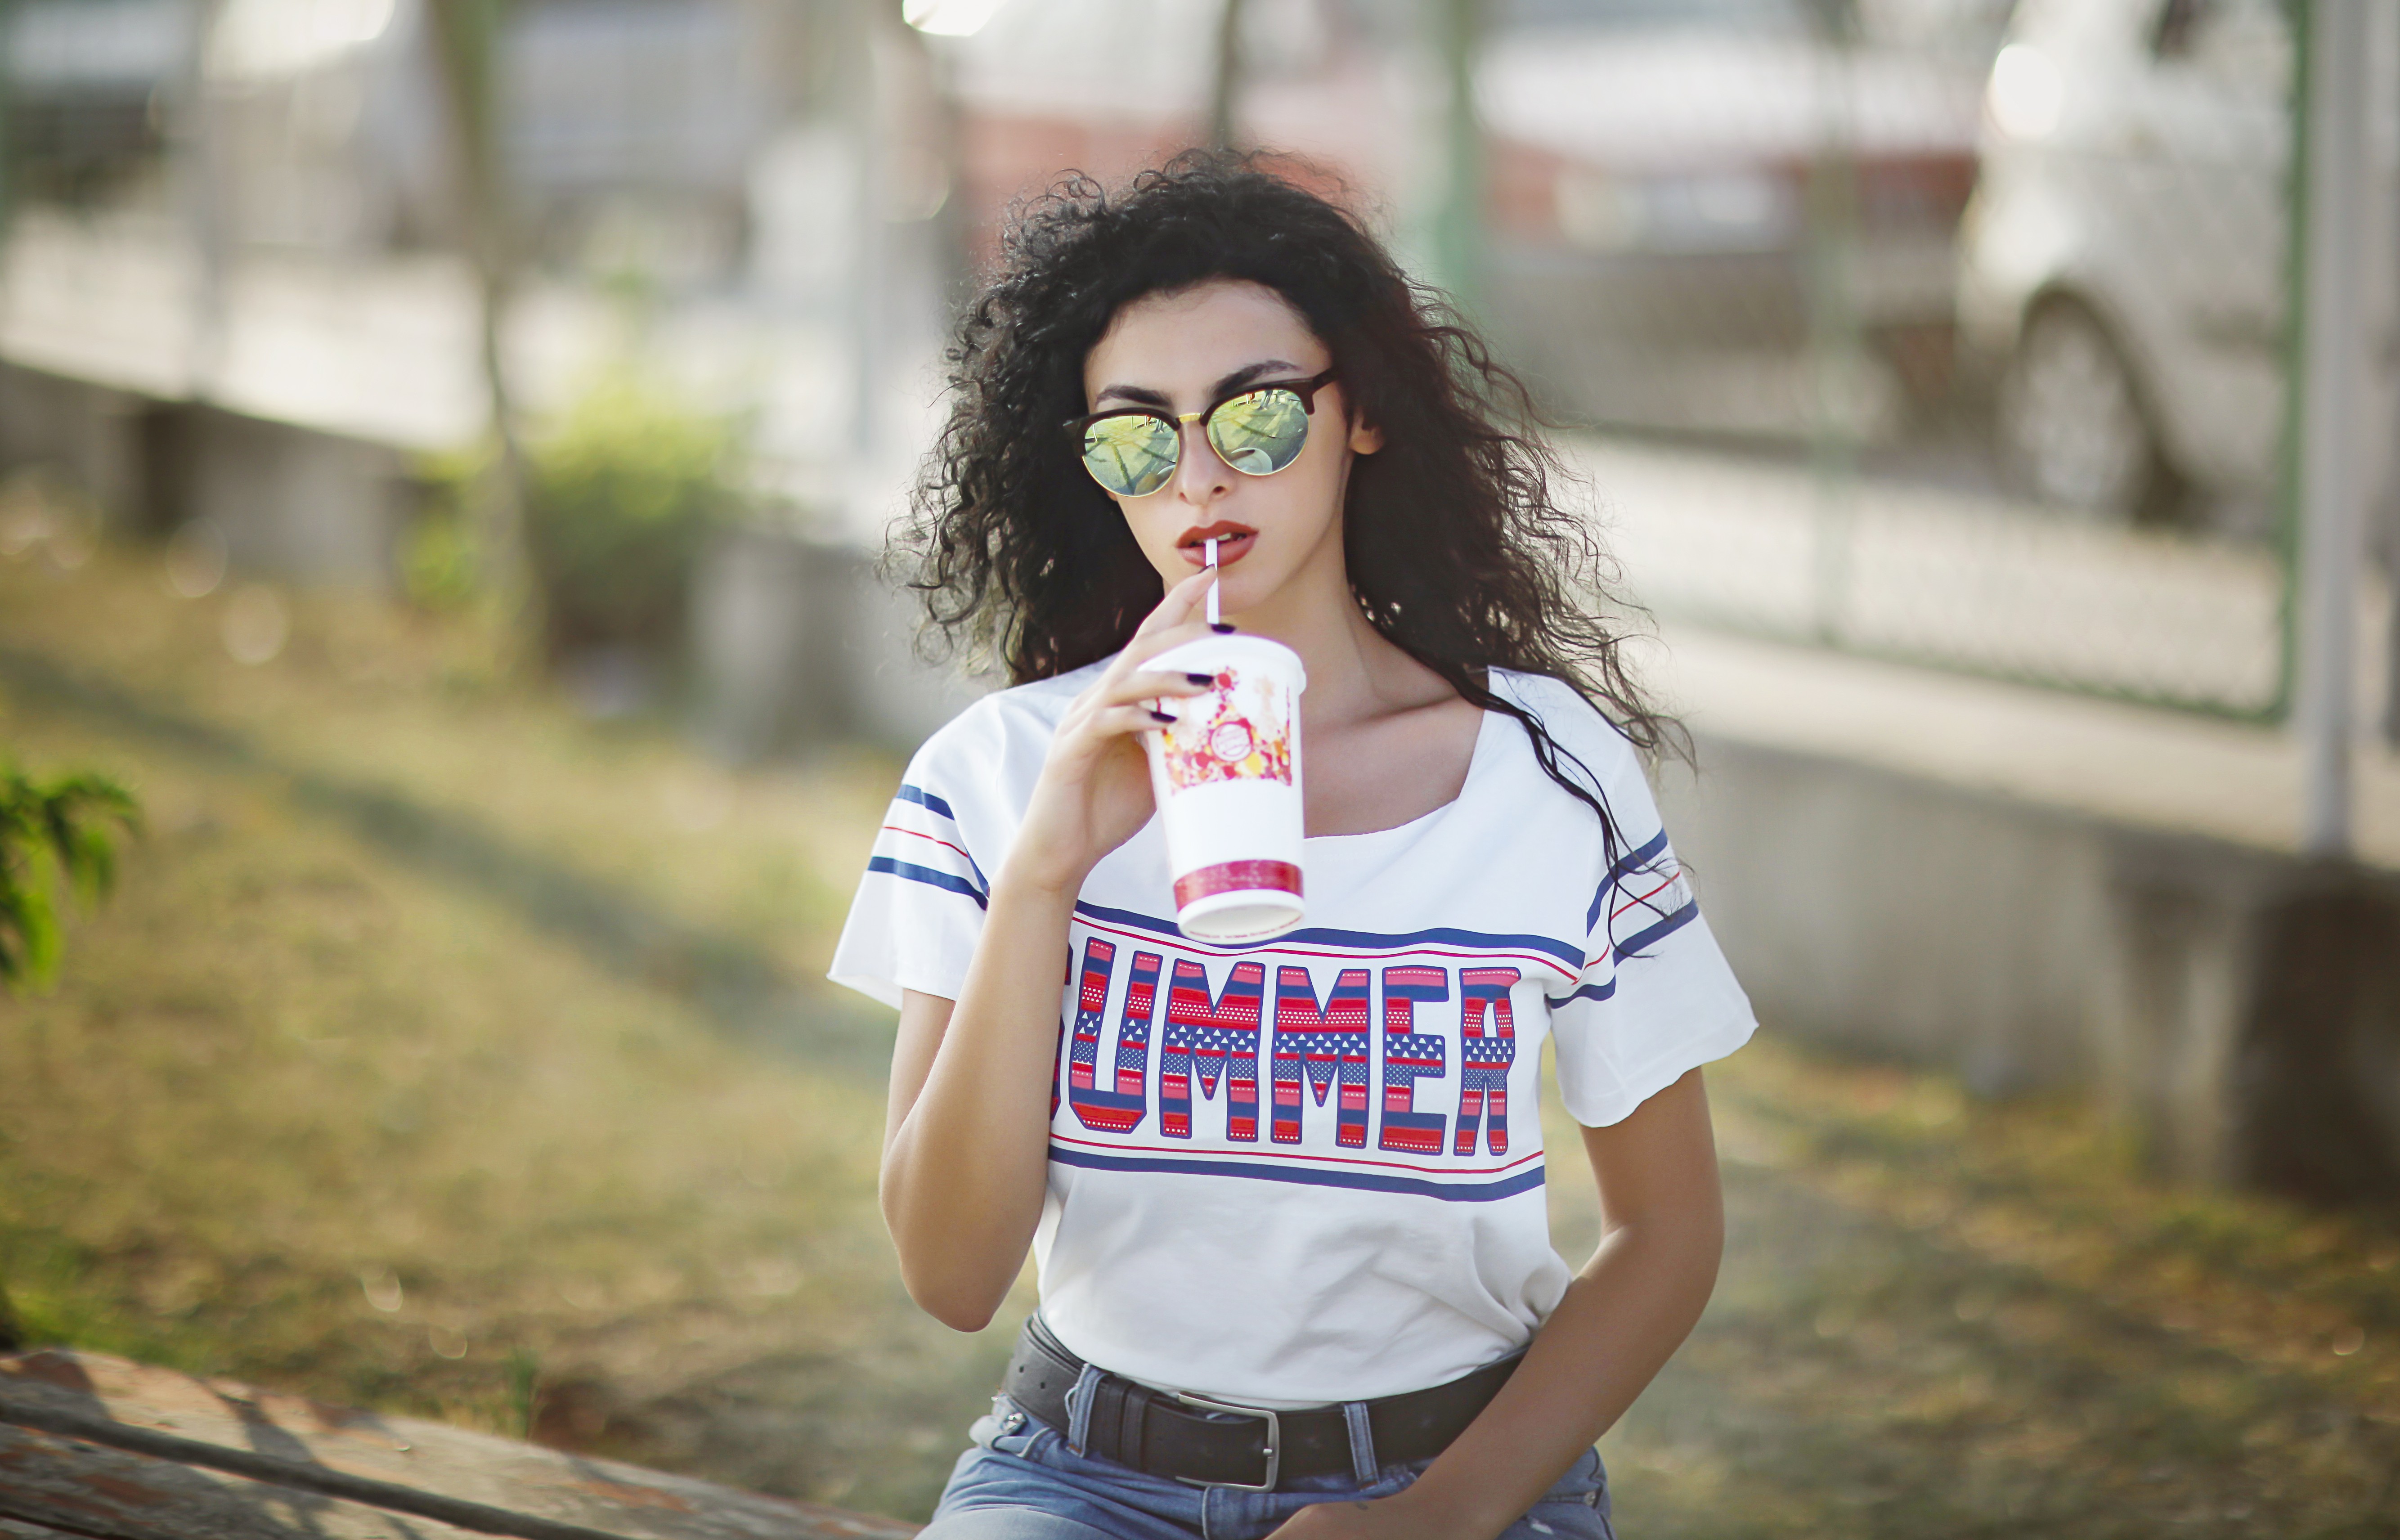 Fashion Hit Girl Brunette Curly Hair Sunglasses Women With Shades Women Outdoors 5335x3423